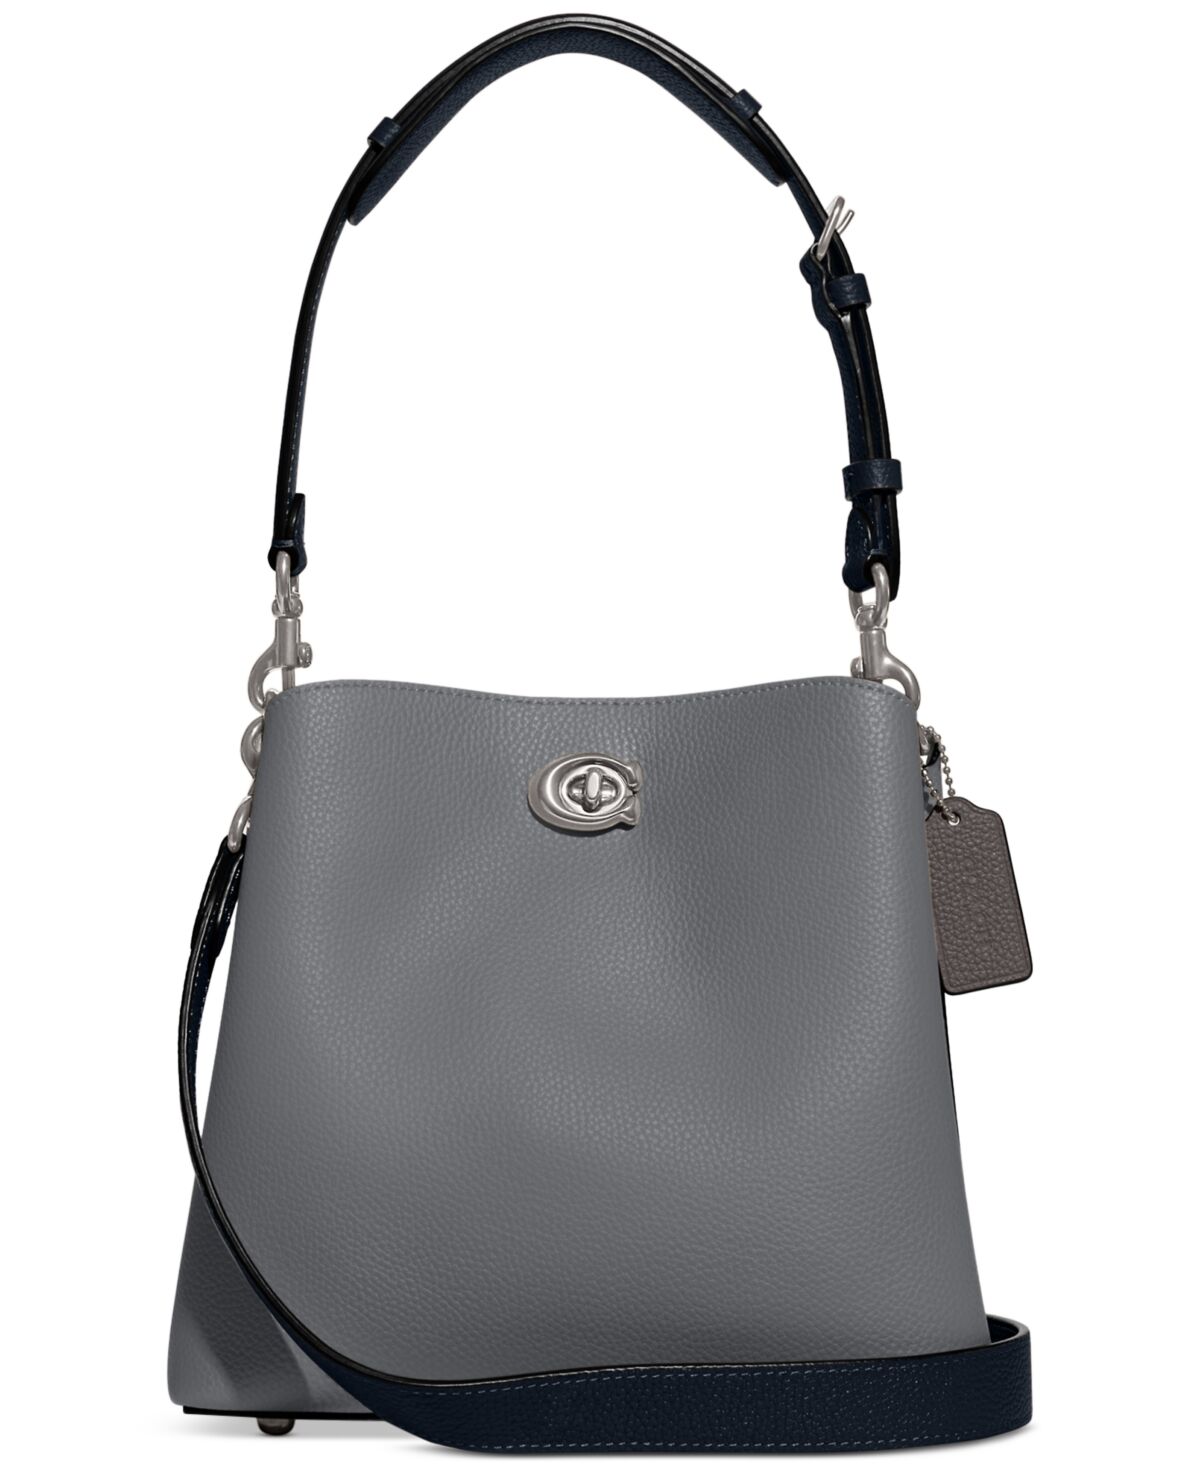 Coach Pebble Leather Willow Bucket Bag with Convertible Straps - Grey Blue